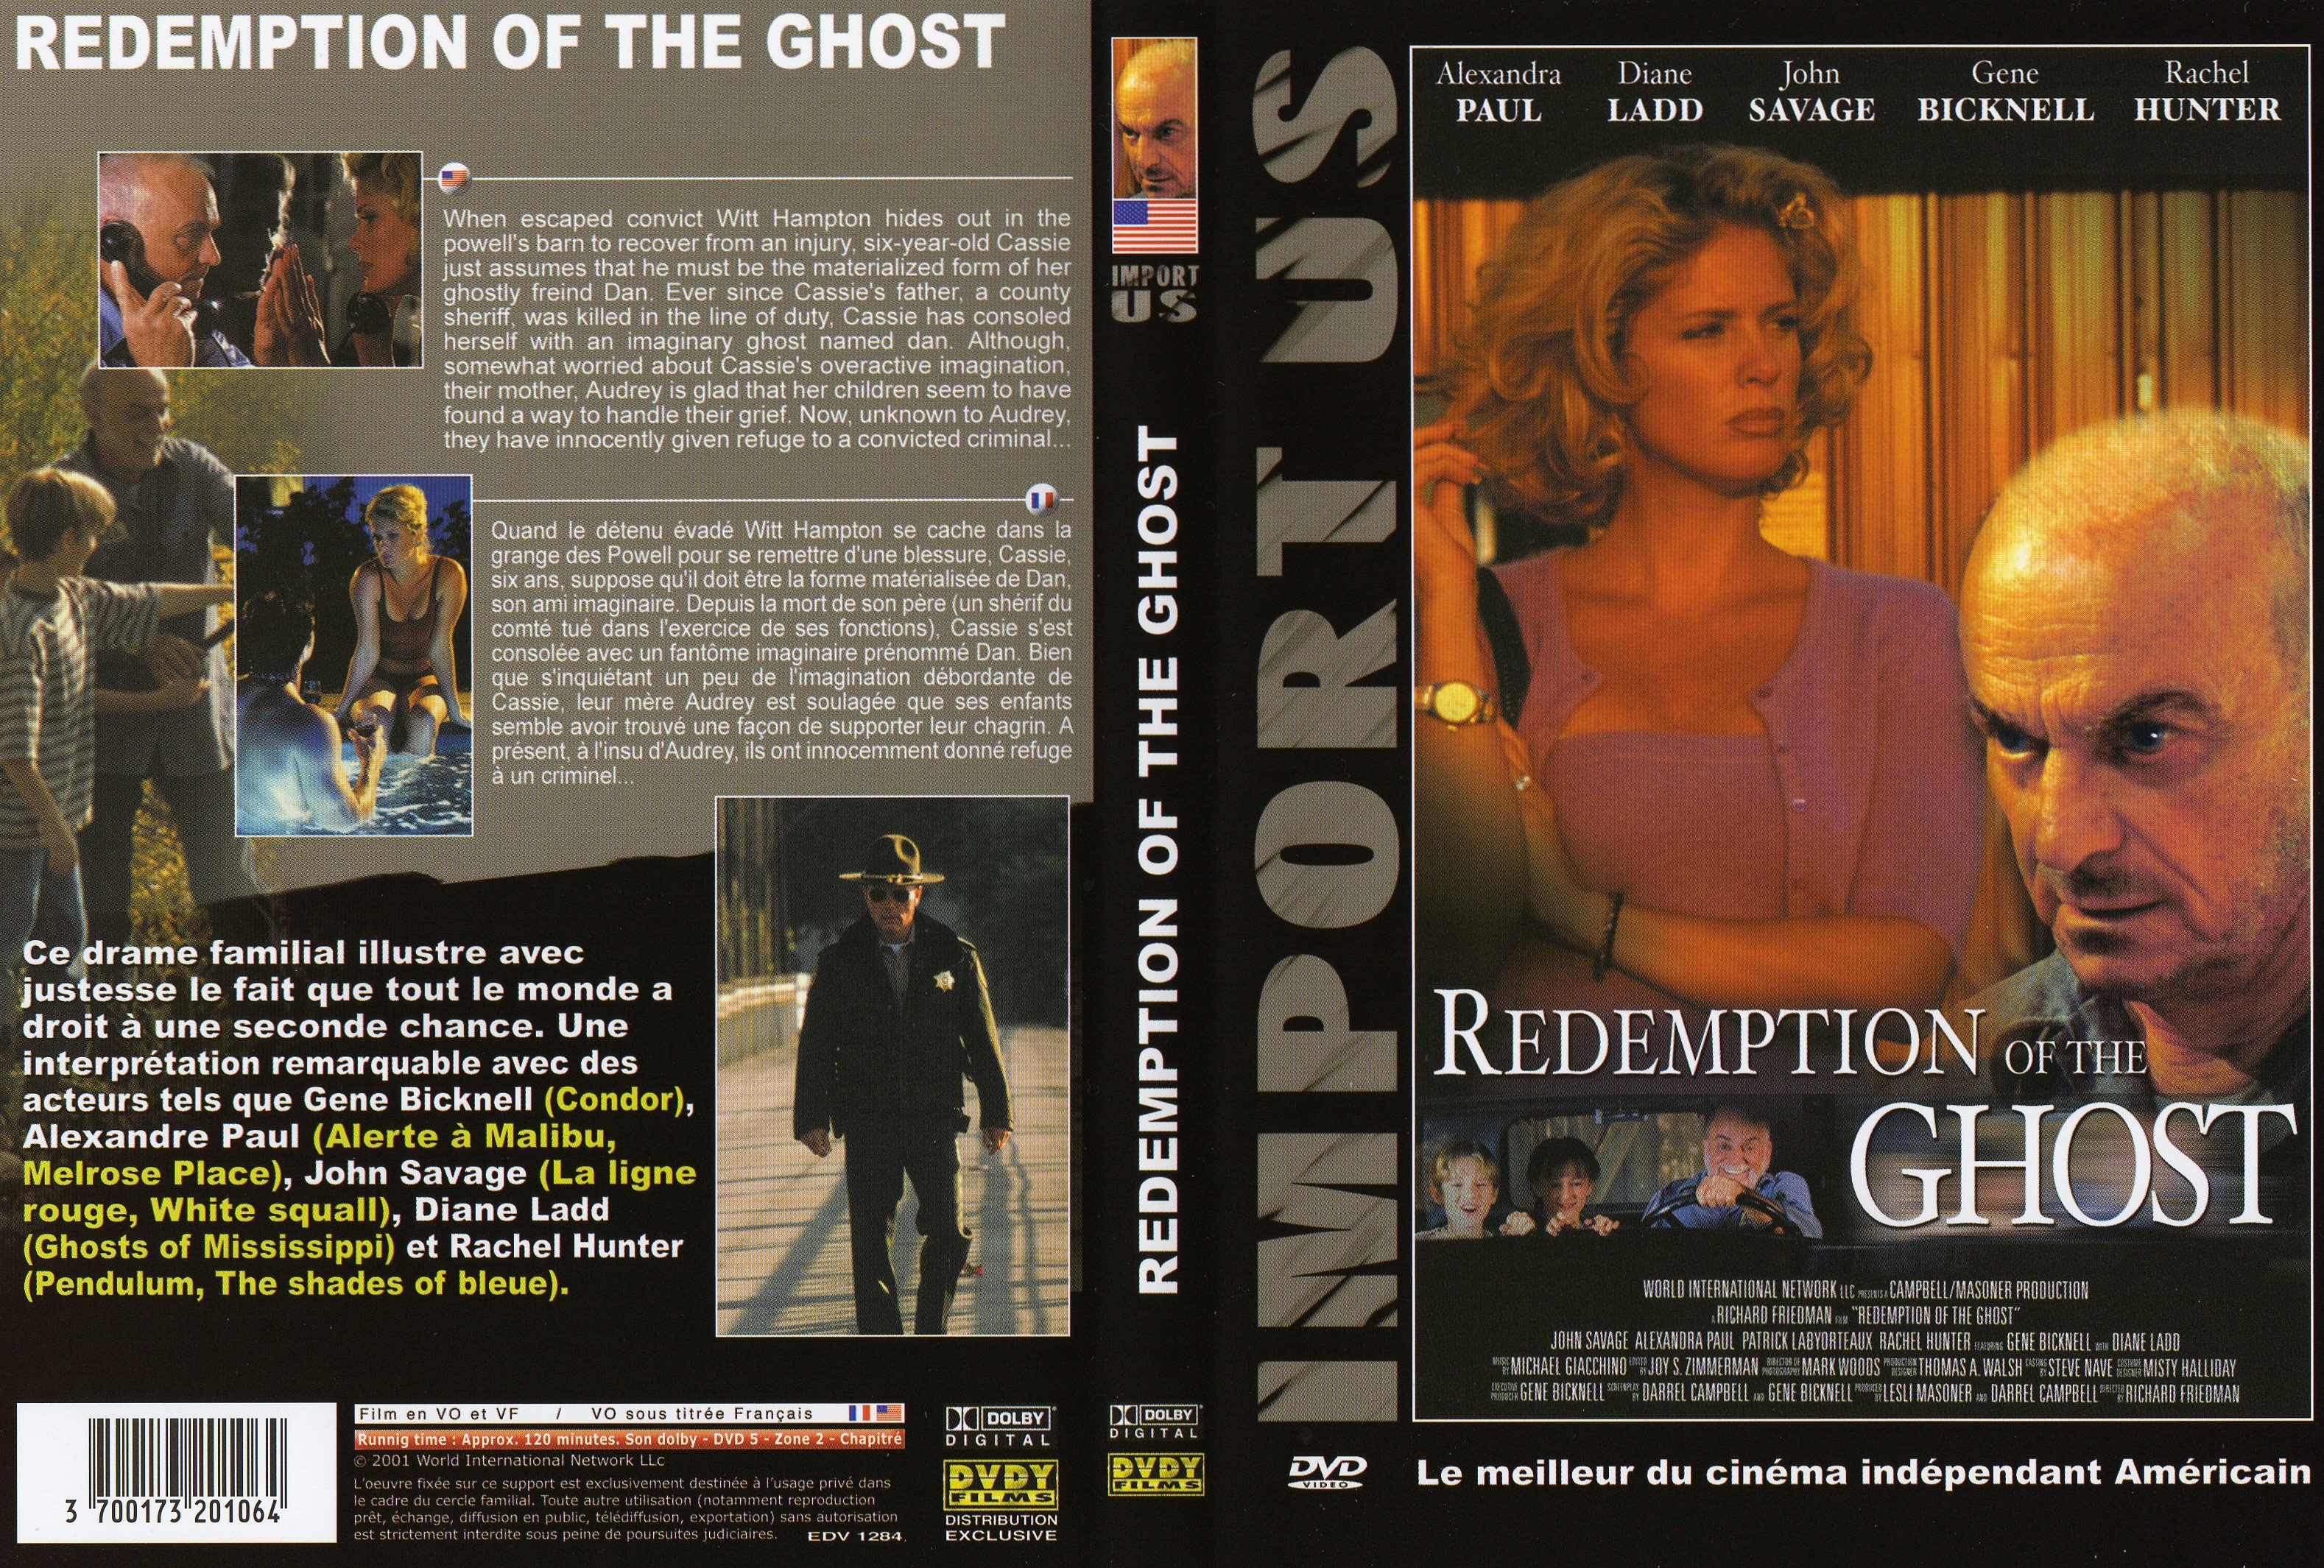 Jaquette DVD Redemption of the ghost